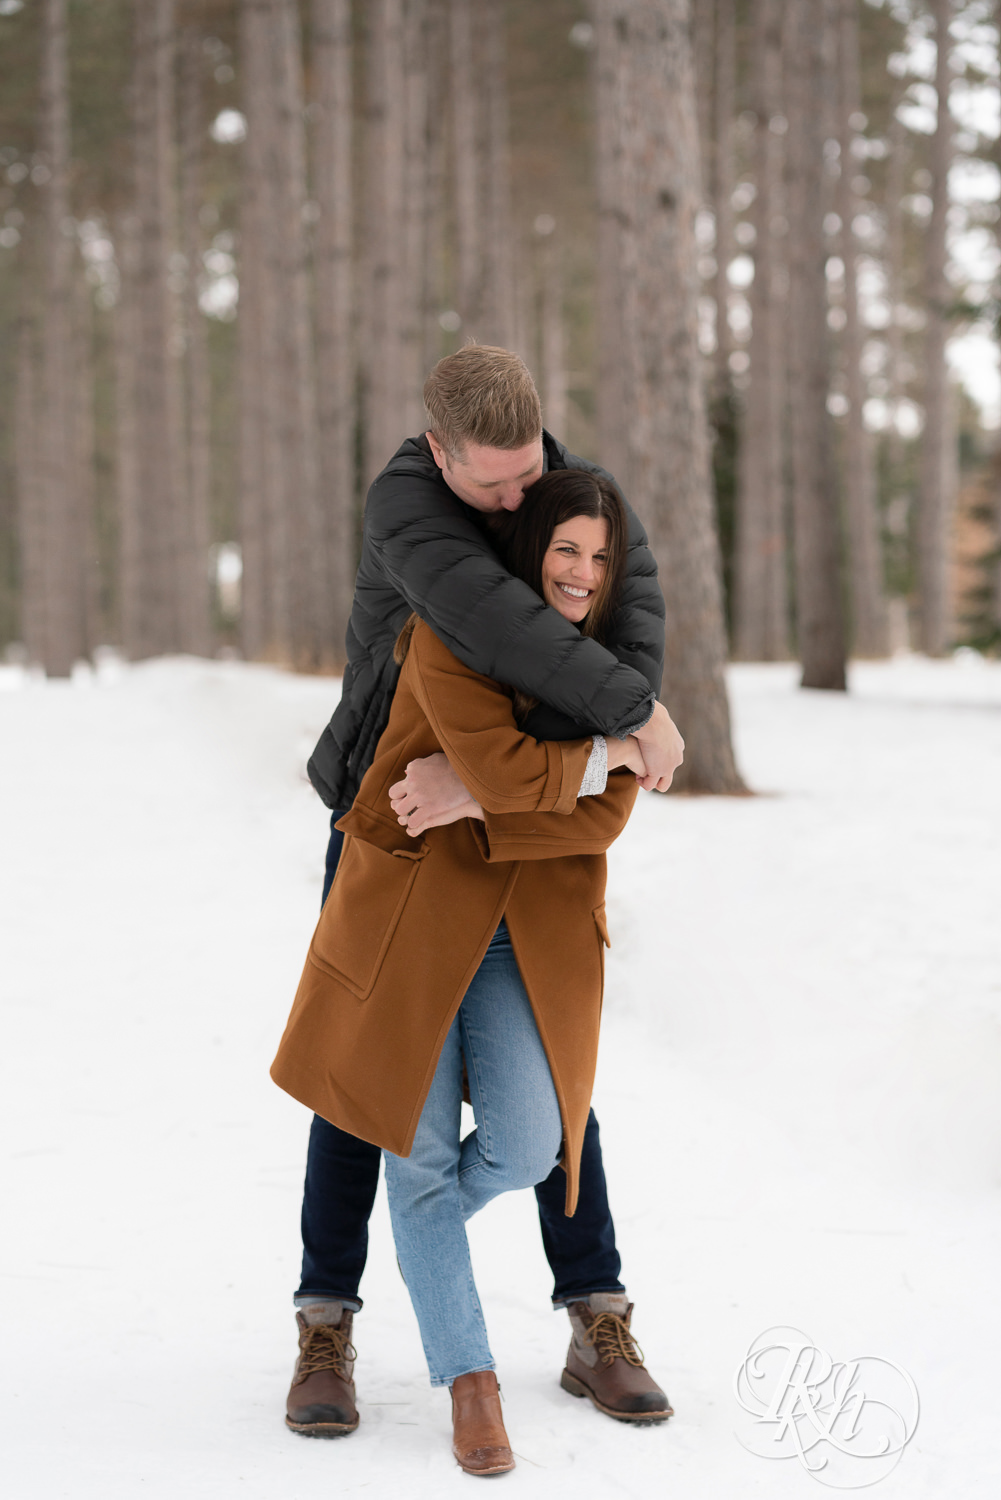 Man and woman laughing in the snow at Hansen Tree Farm in Anoka, Minnesota.